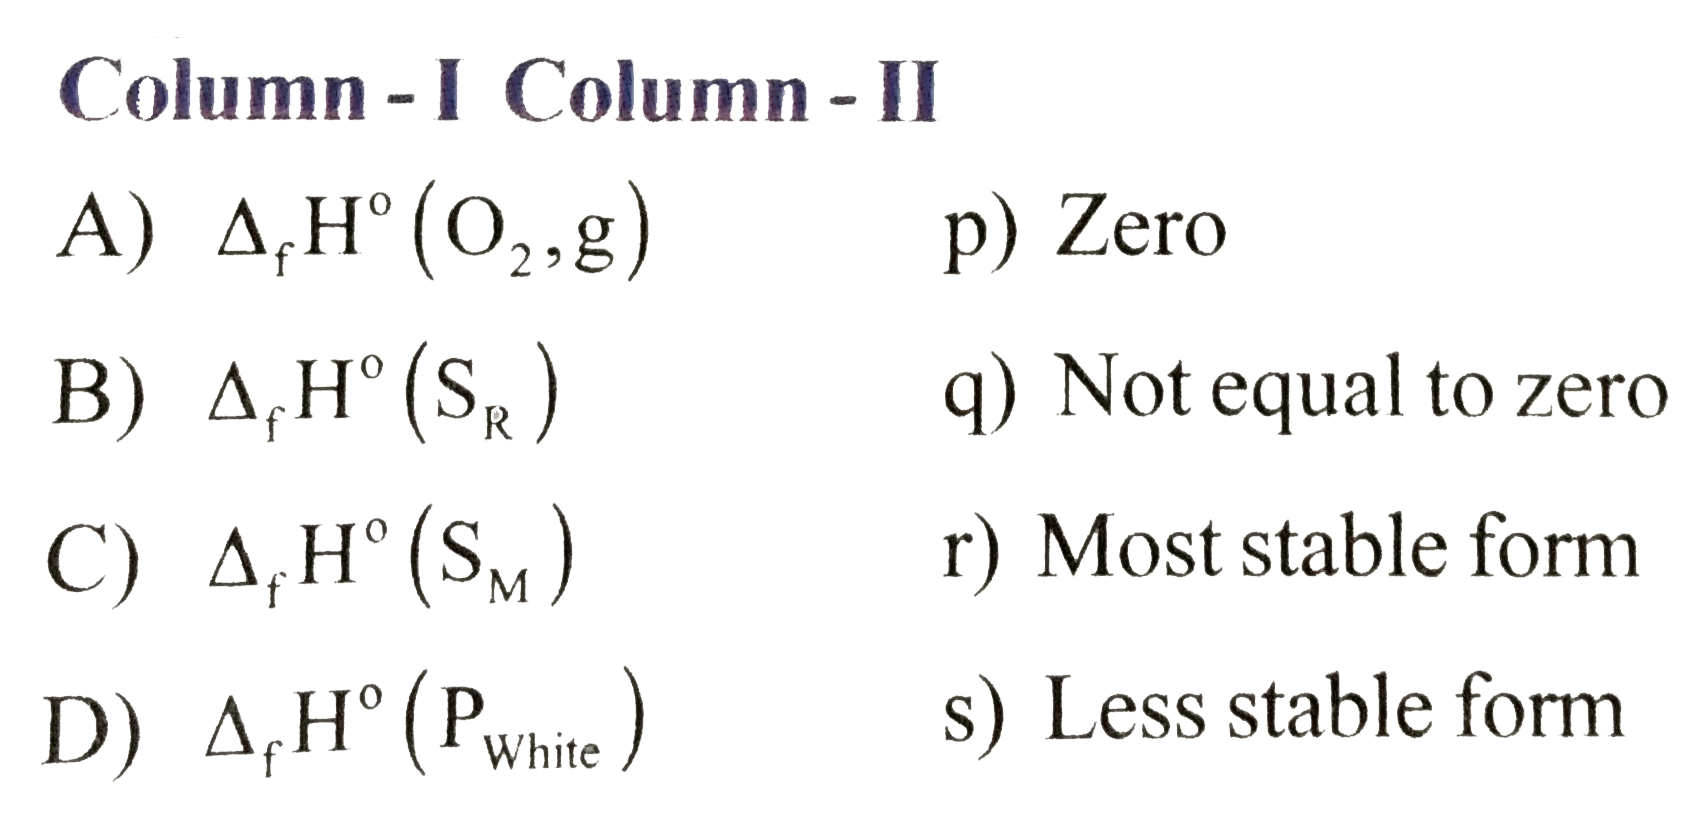 Match column - I with Colimn - II